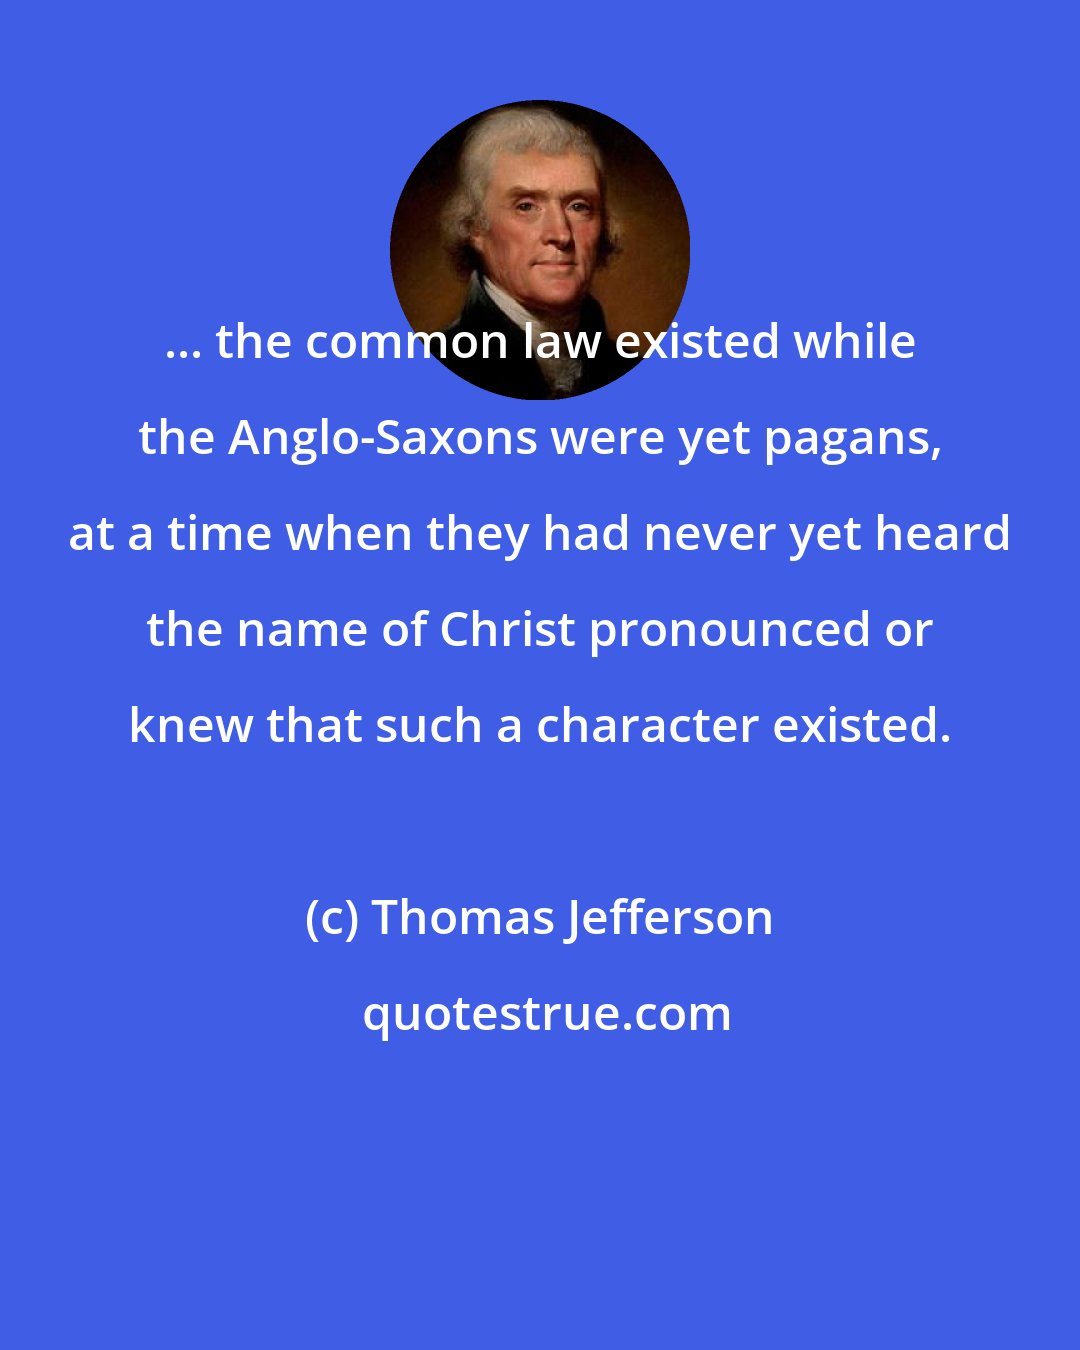 Thomas Jefferson: ... the common law existed while the Anglo-Saxons were yet pagans, at a time when they had never yet heard the name of Christ pronounced or knew that such a character existed.